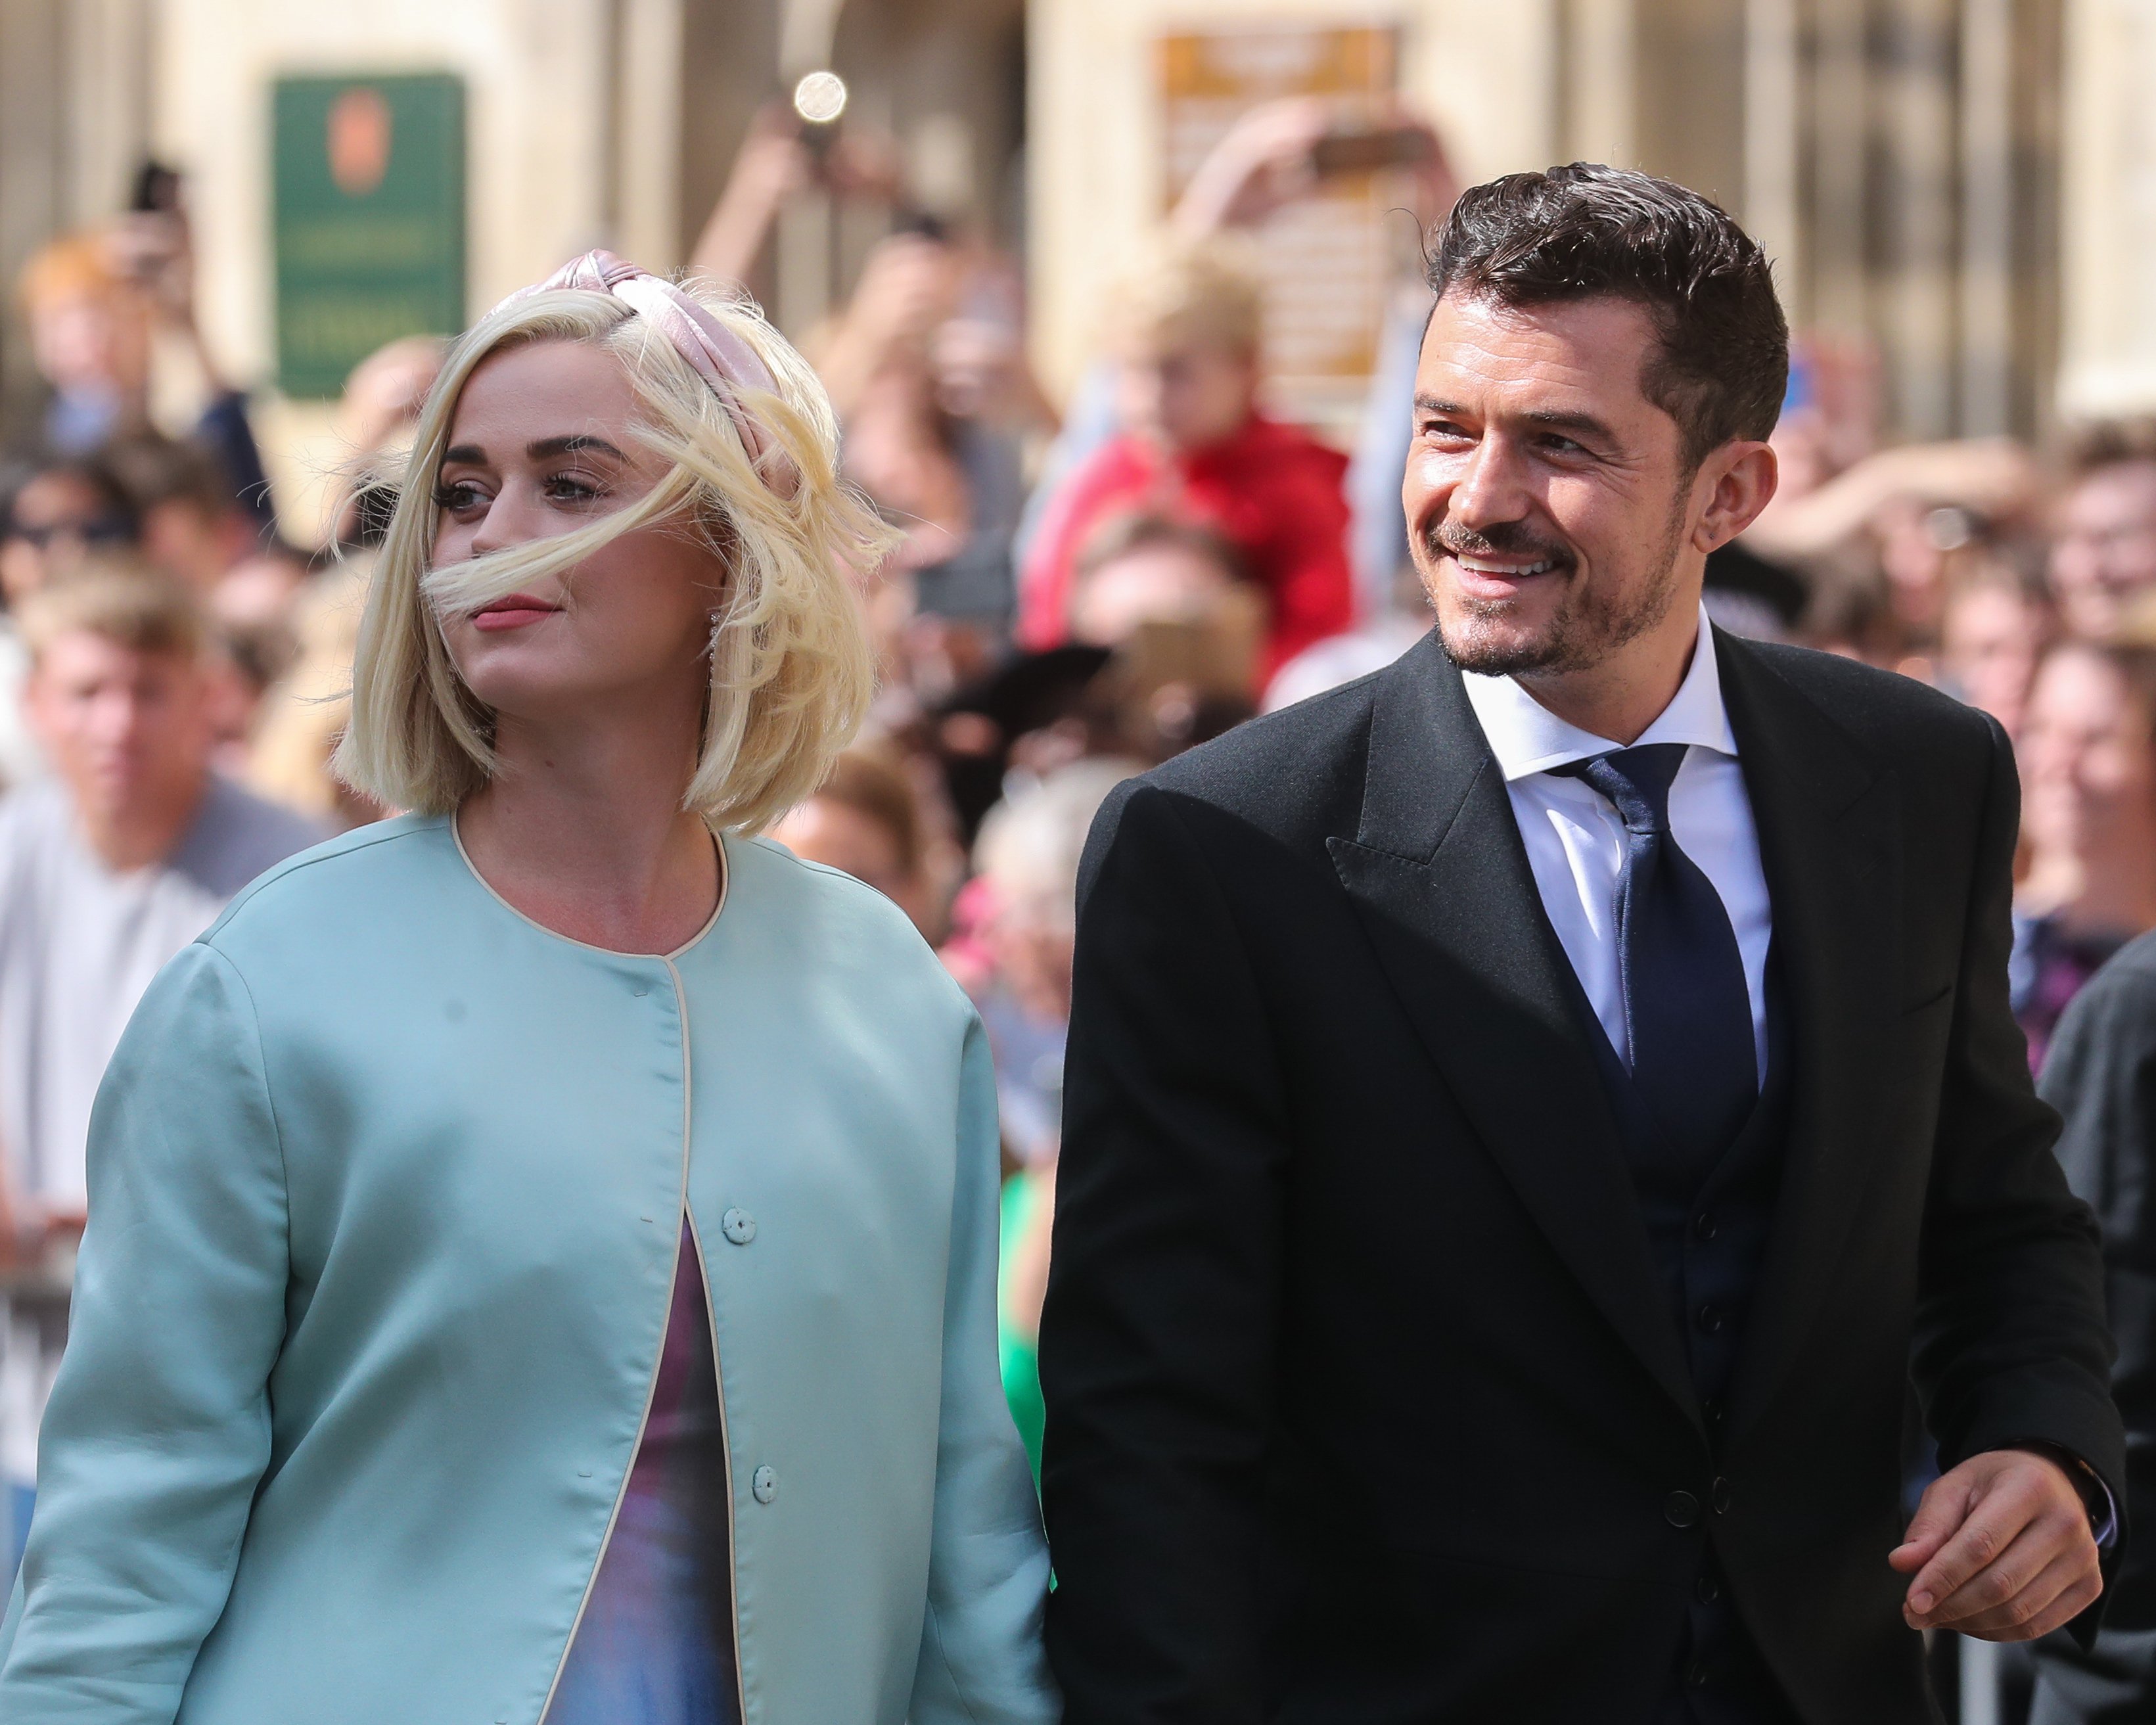 Katy Perry and Orlando Bloom seen at the wedding of Ellie Goulding and Caspar Jopling on August 31, 2019, in York, England. | Source: Getty Images.